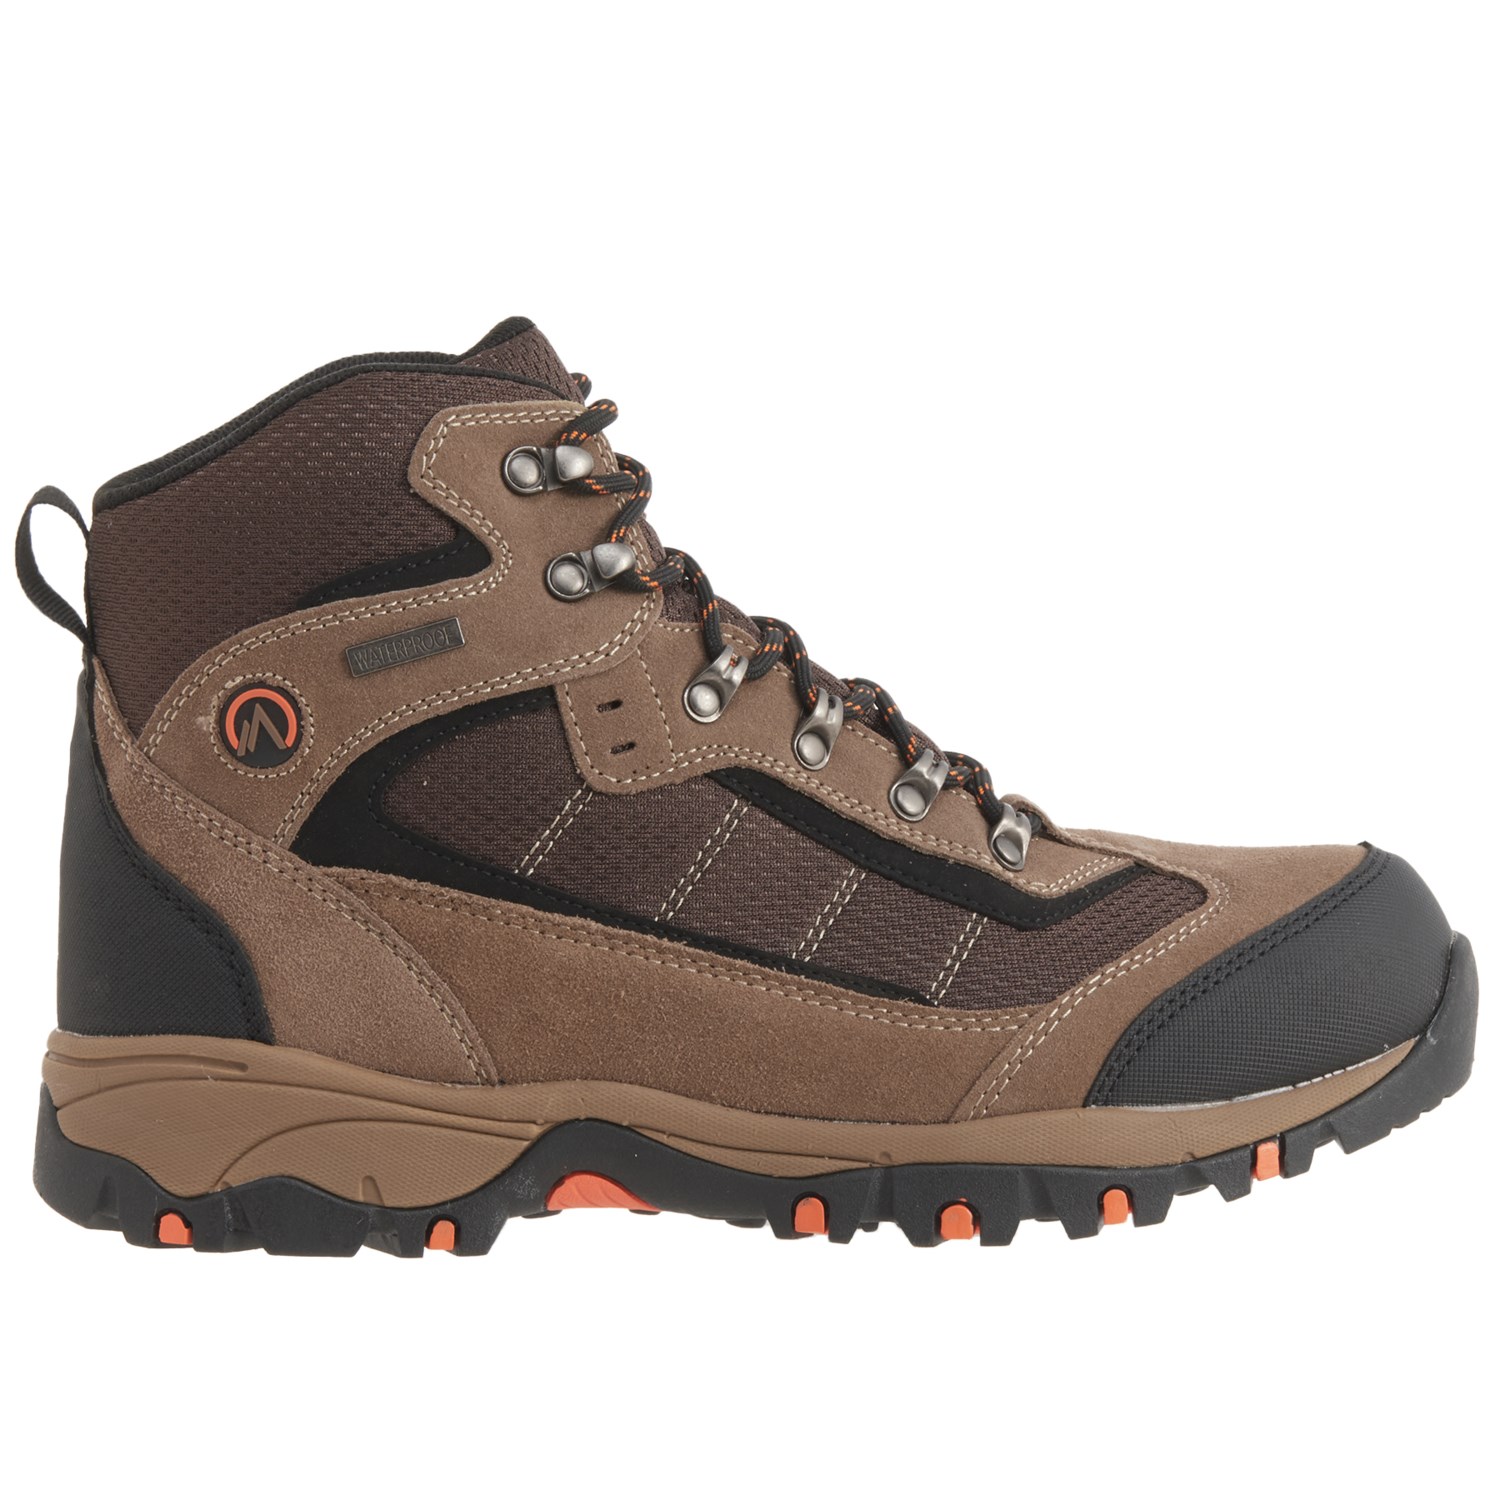 Nevados Lakewood Hiking Boots (For Men) - Save 42%